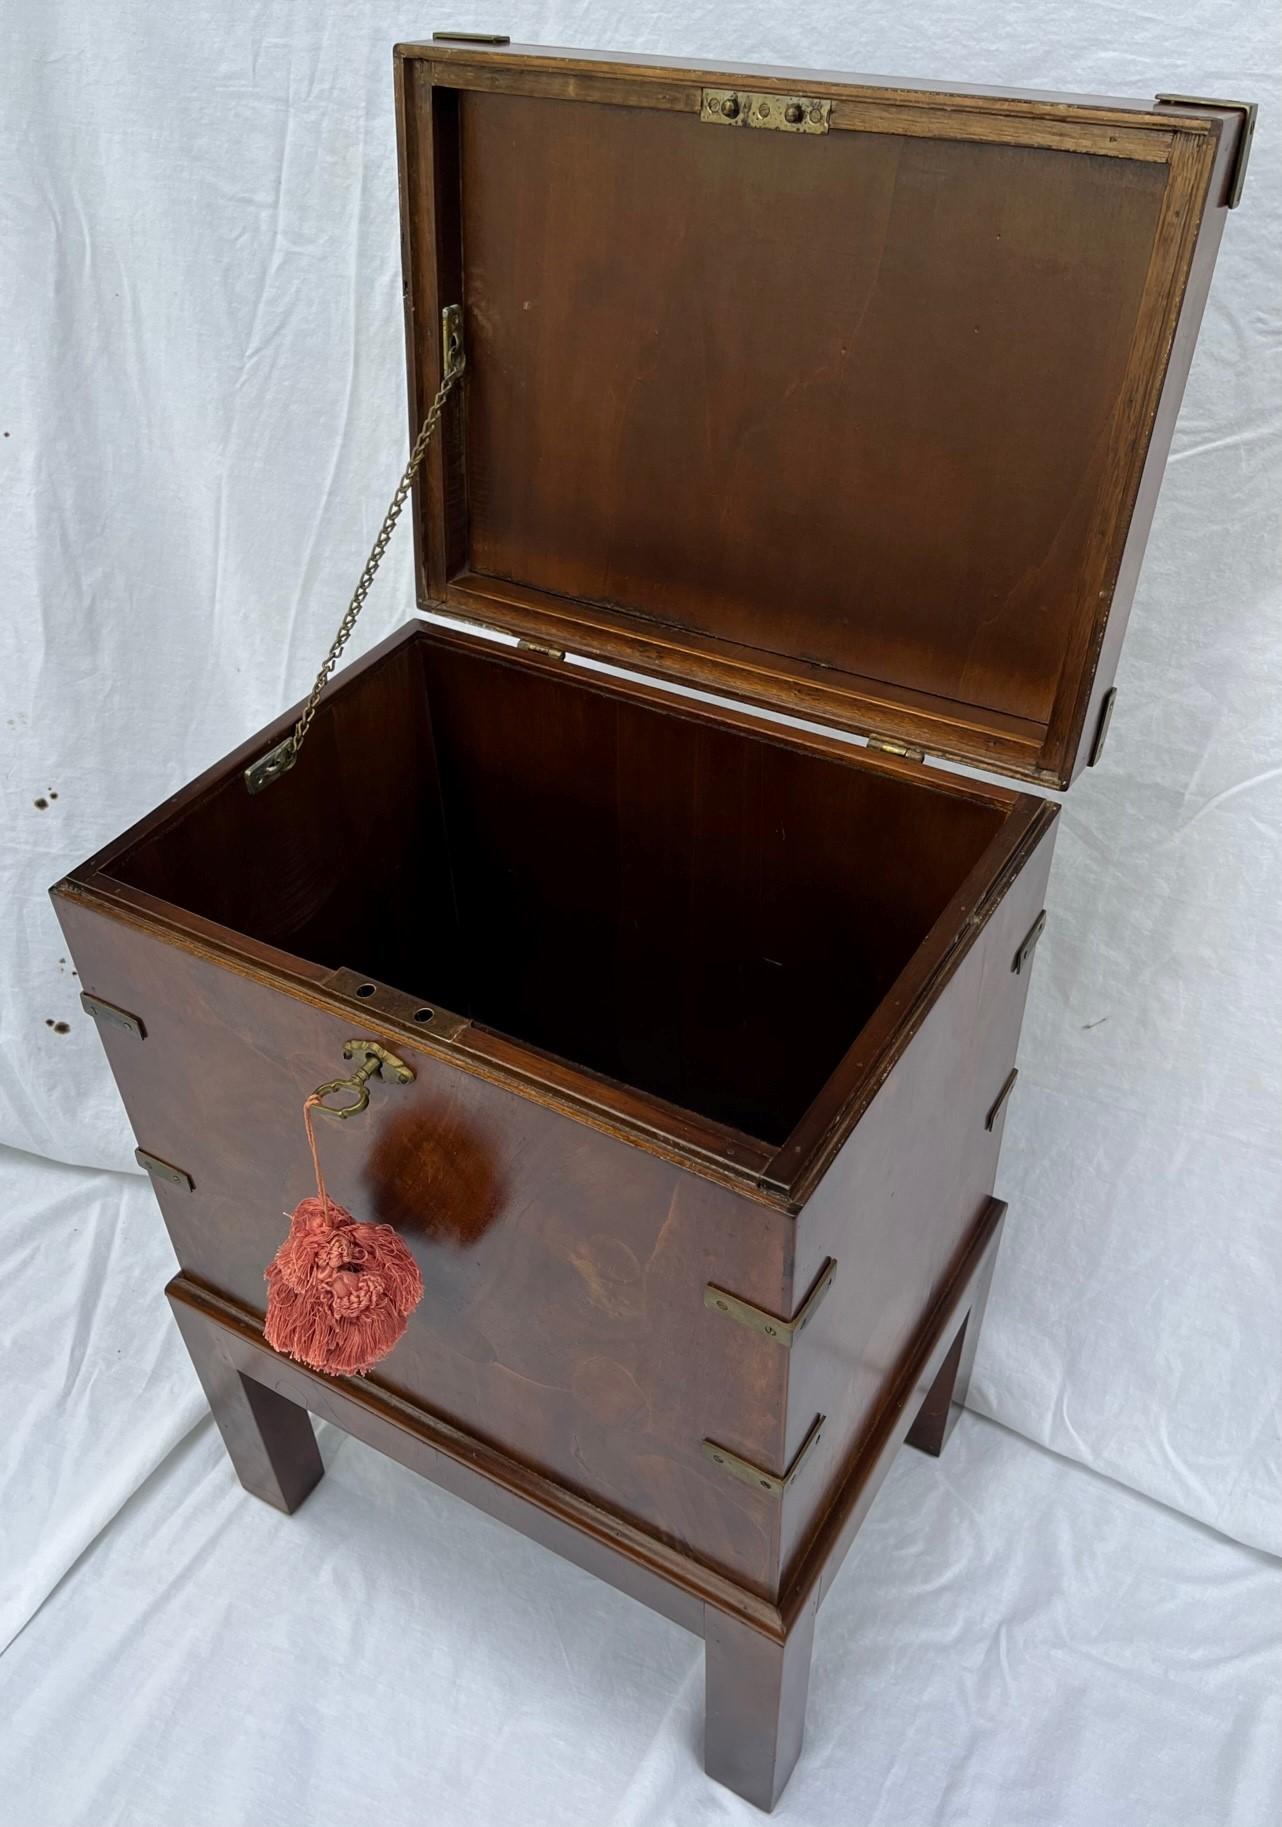 English Georgian Walnut Patched Veneer Cellarette on Stand.

Classic elegant English cellarette from the George III period. The walnut veneer has an interesting patch design. It has a brass hinged top, brass escutcheon and original working lock and